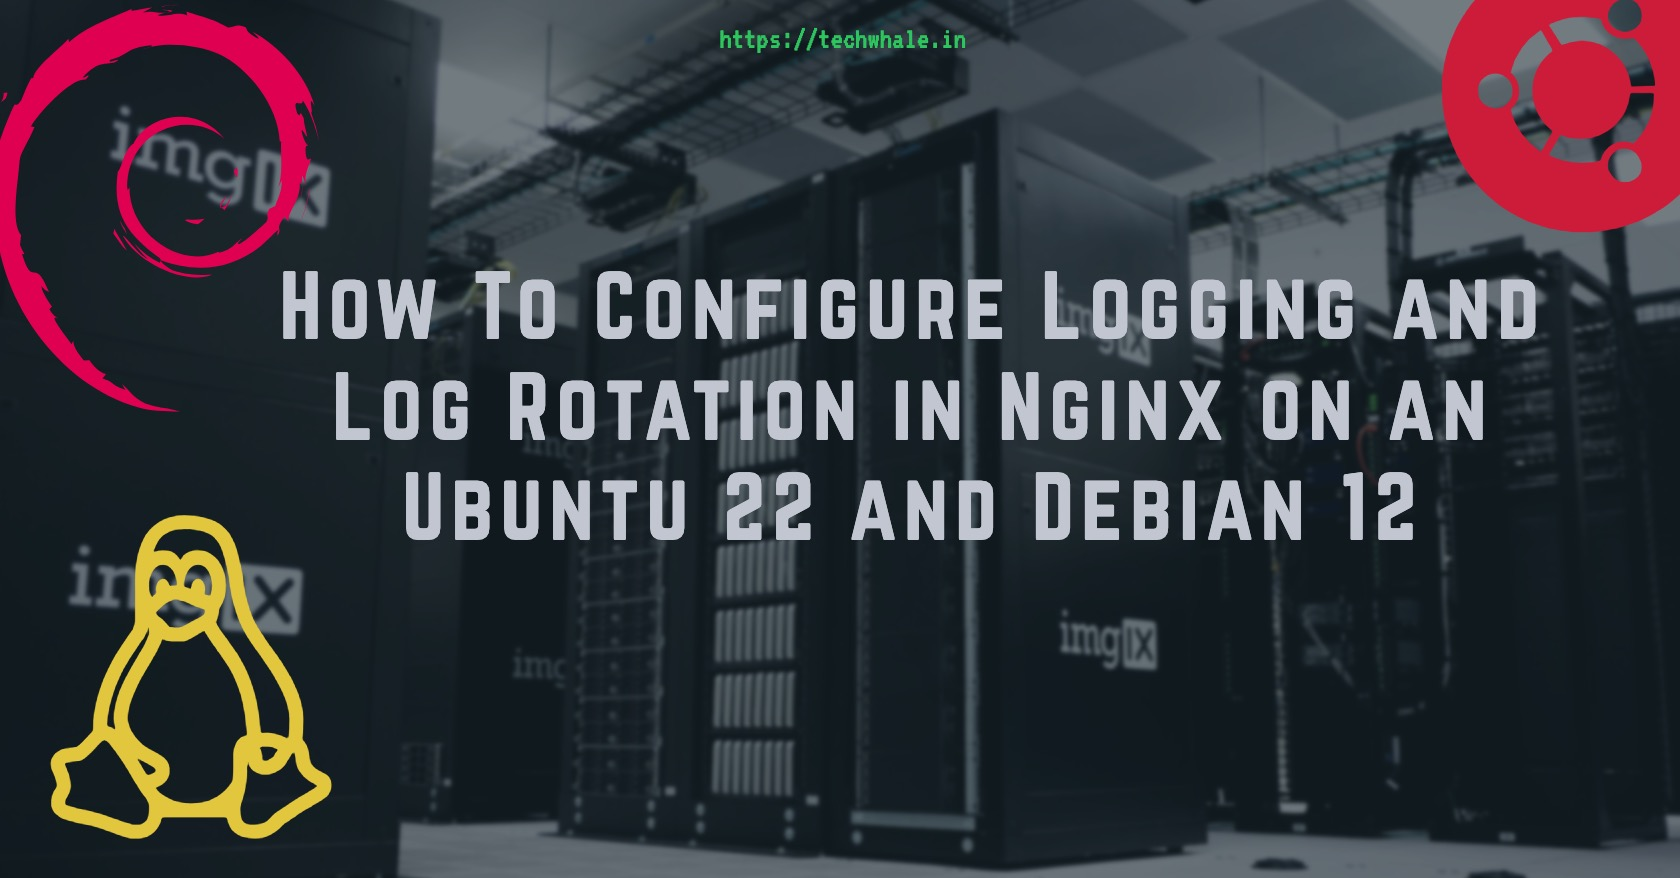 How To Configure Logging and Log Rotation in Nginx on an Ubuntu 22 and Debian 12